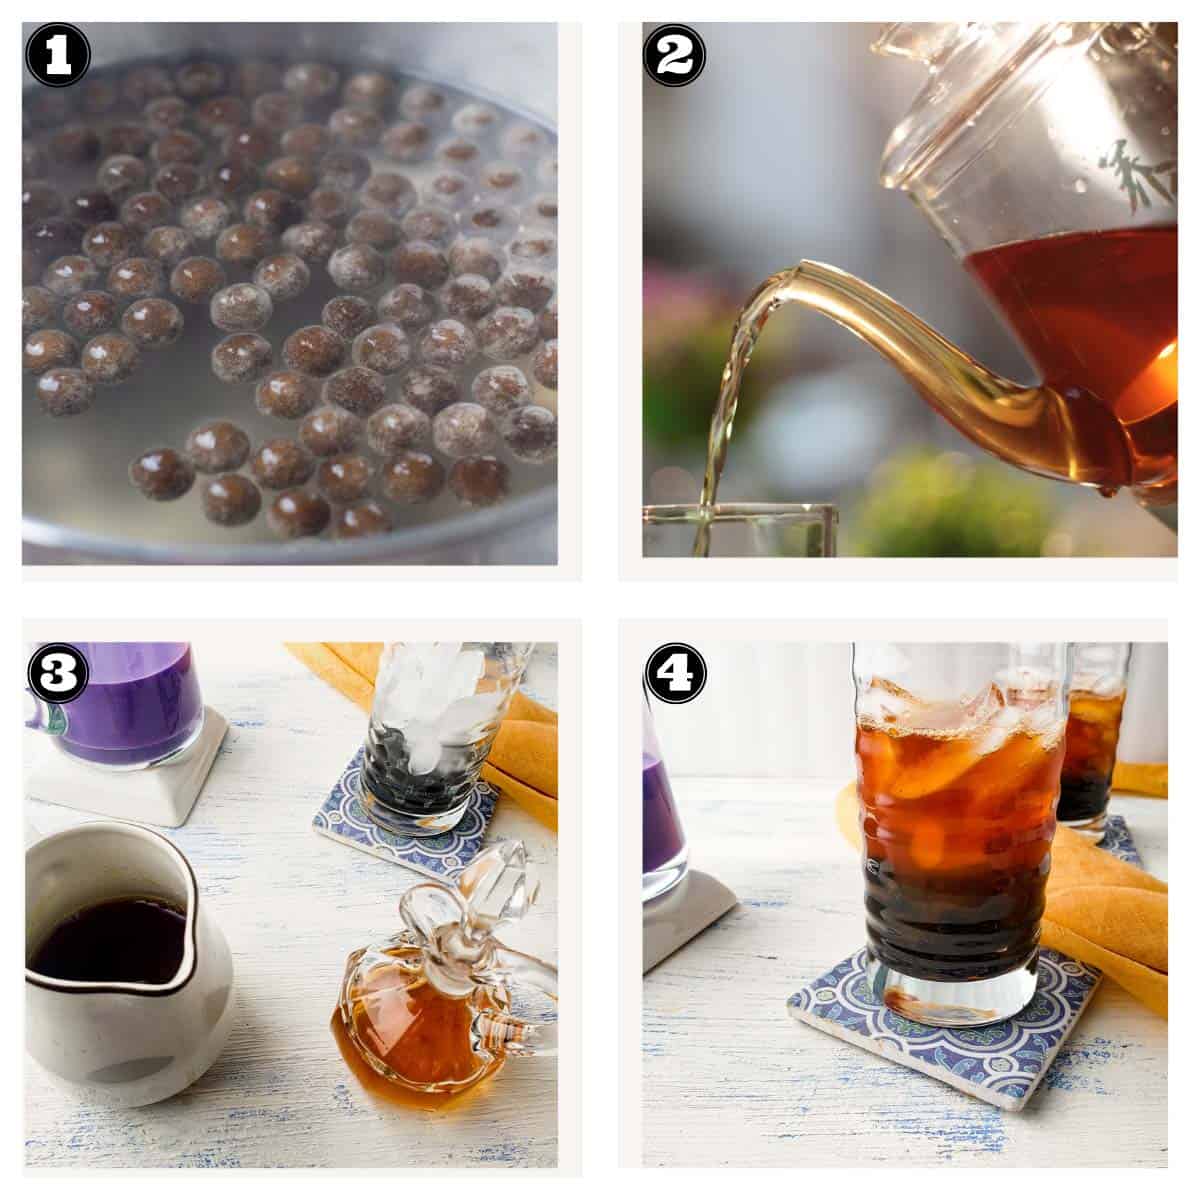 images showing steps involved in making ube milk tea